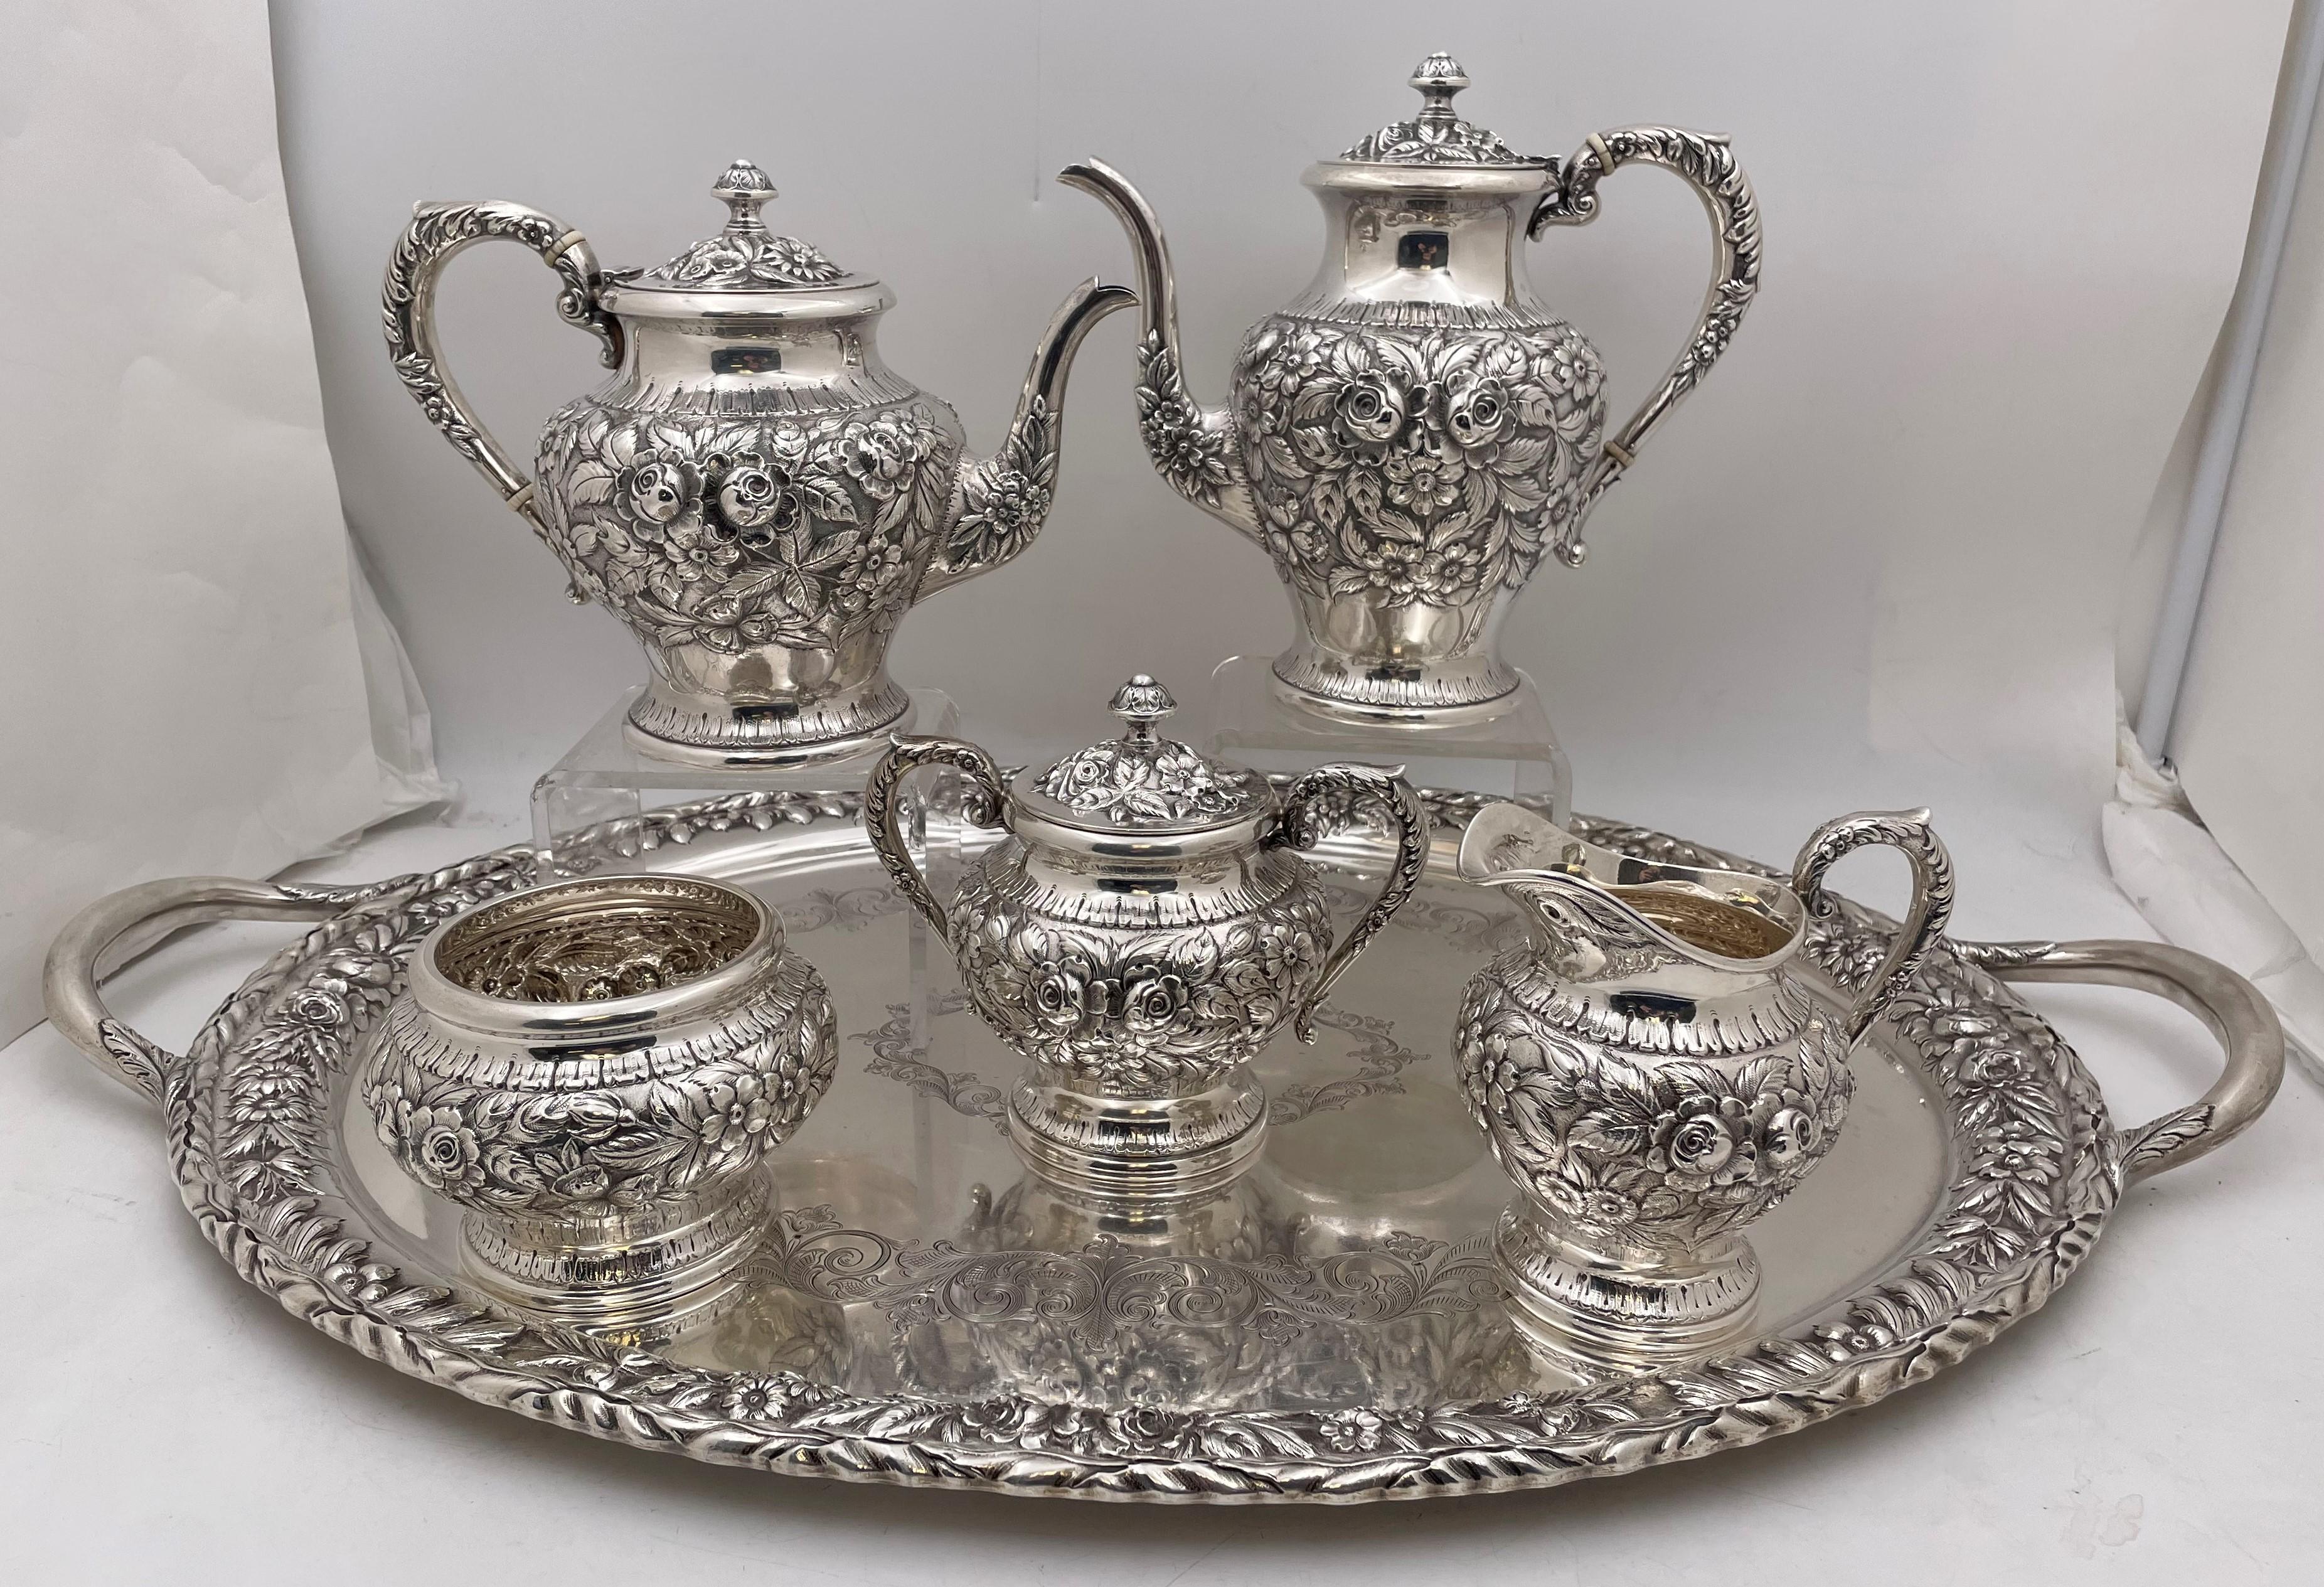 S. Kirk & Son, sterling silver repousse, hand chased and hand decorated tea and coffee set, all matching, richly adorned with crisp floral motifs, in pattern number 474F from 1932, consisting of:

- a tray measuring 28 1/2'' from handle to handle